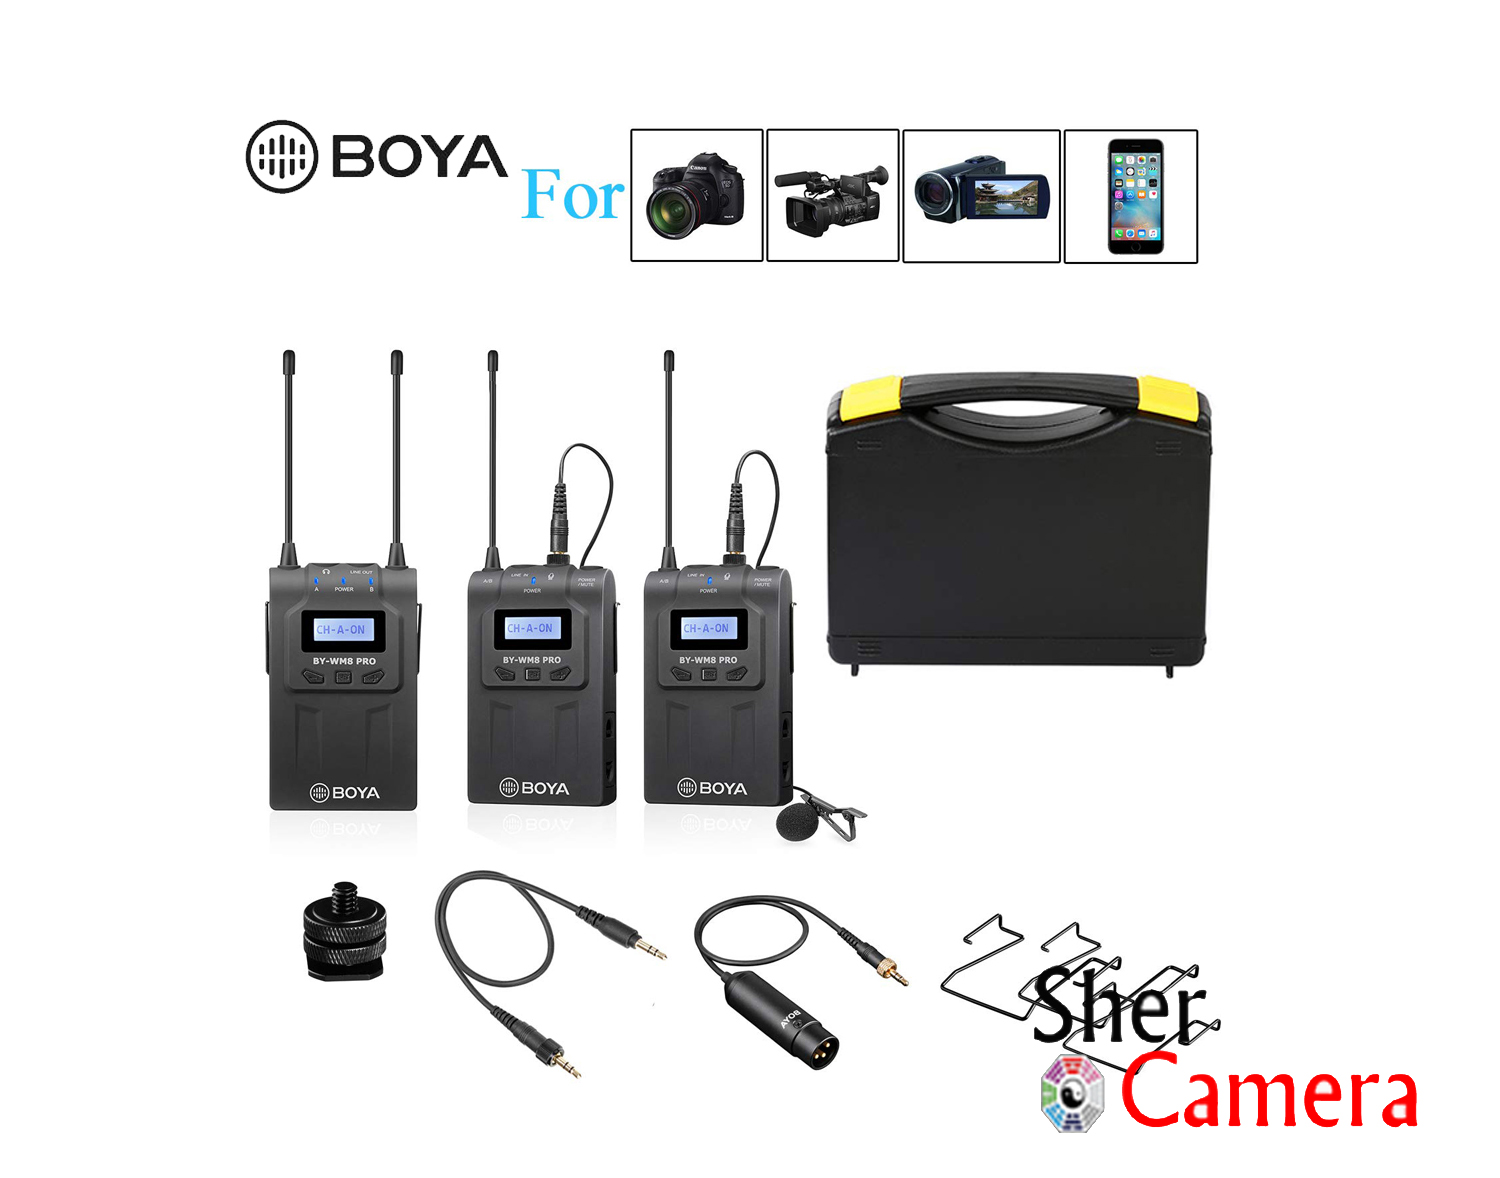 BOYA WM8 PRO-K2 Dual-Channel Wireless Lavalier Microphone System with 1 Receiver and 2 Transmitter for DSLR Camera& Smartphone Recorder,YouTube Street Interview Facebook Livesteam Vblog